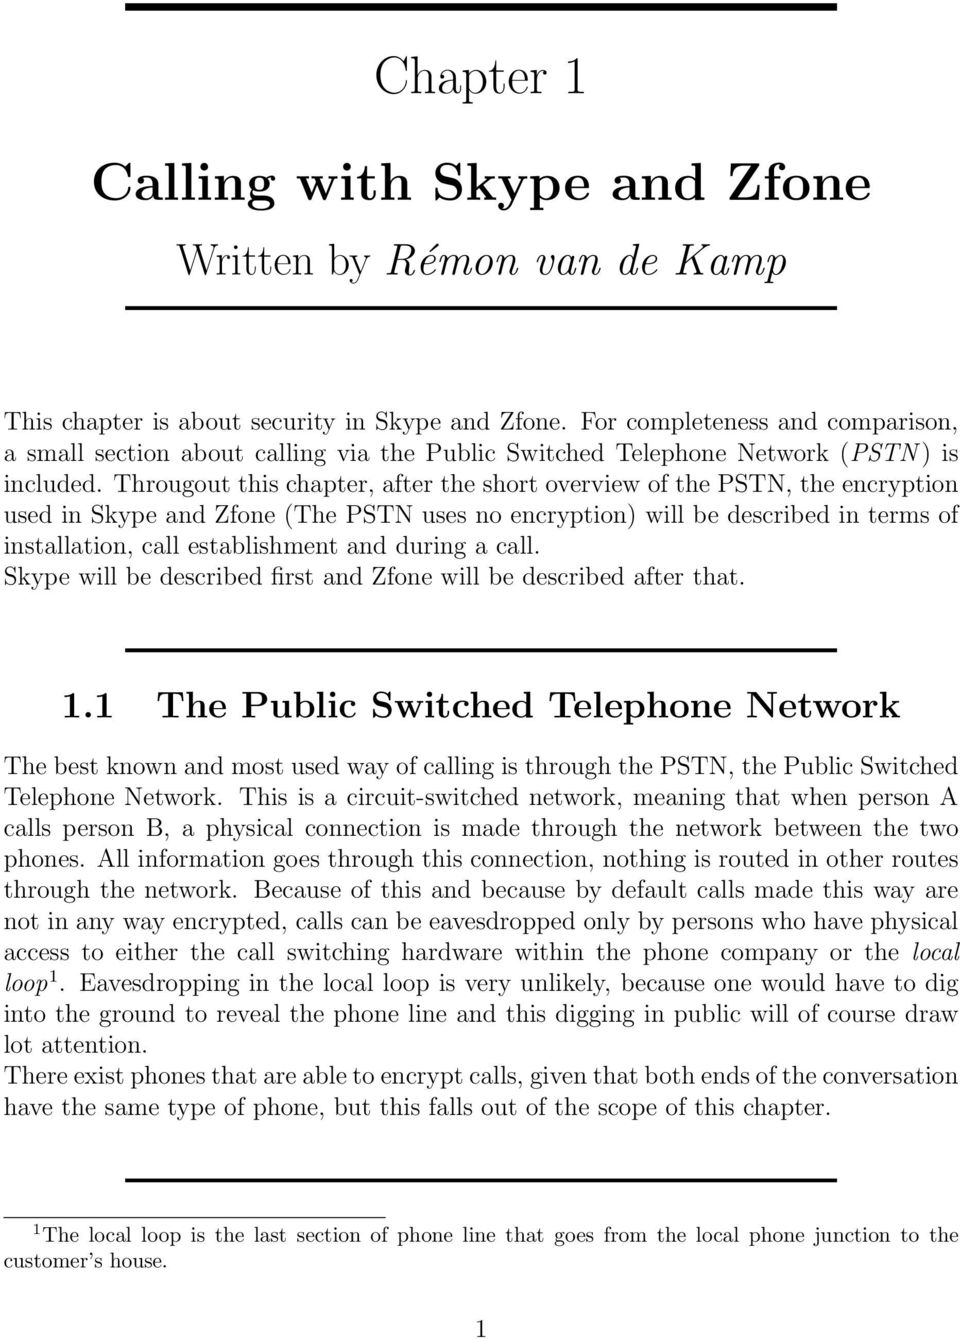 Througout this chapter, after the short overview of the PSTN, the encryption used in Skype and Zfone (The PSTN uses no encryption) will be described in terms of installation, call establishment and